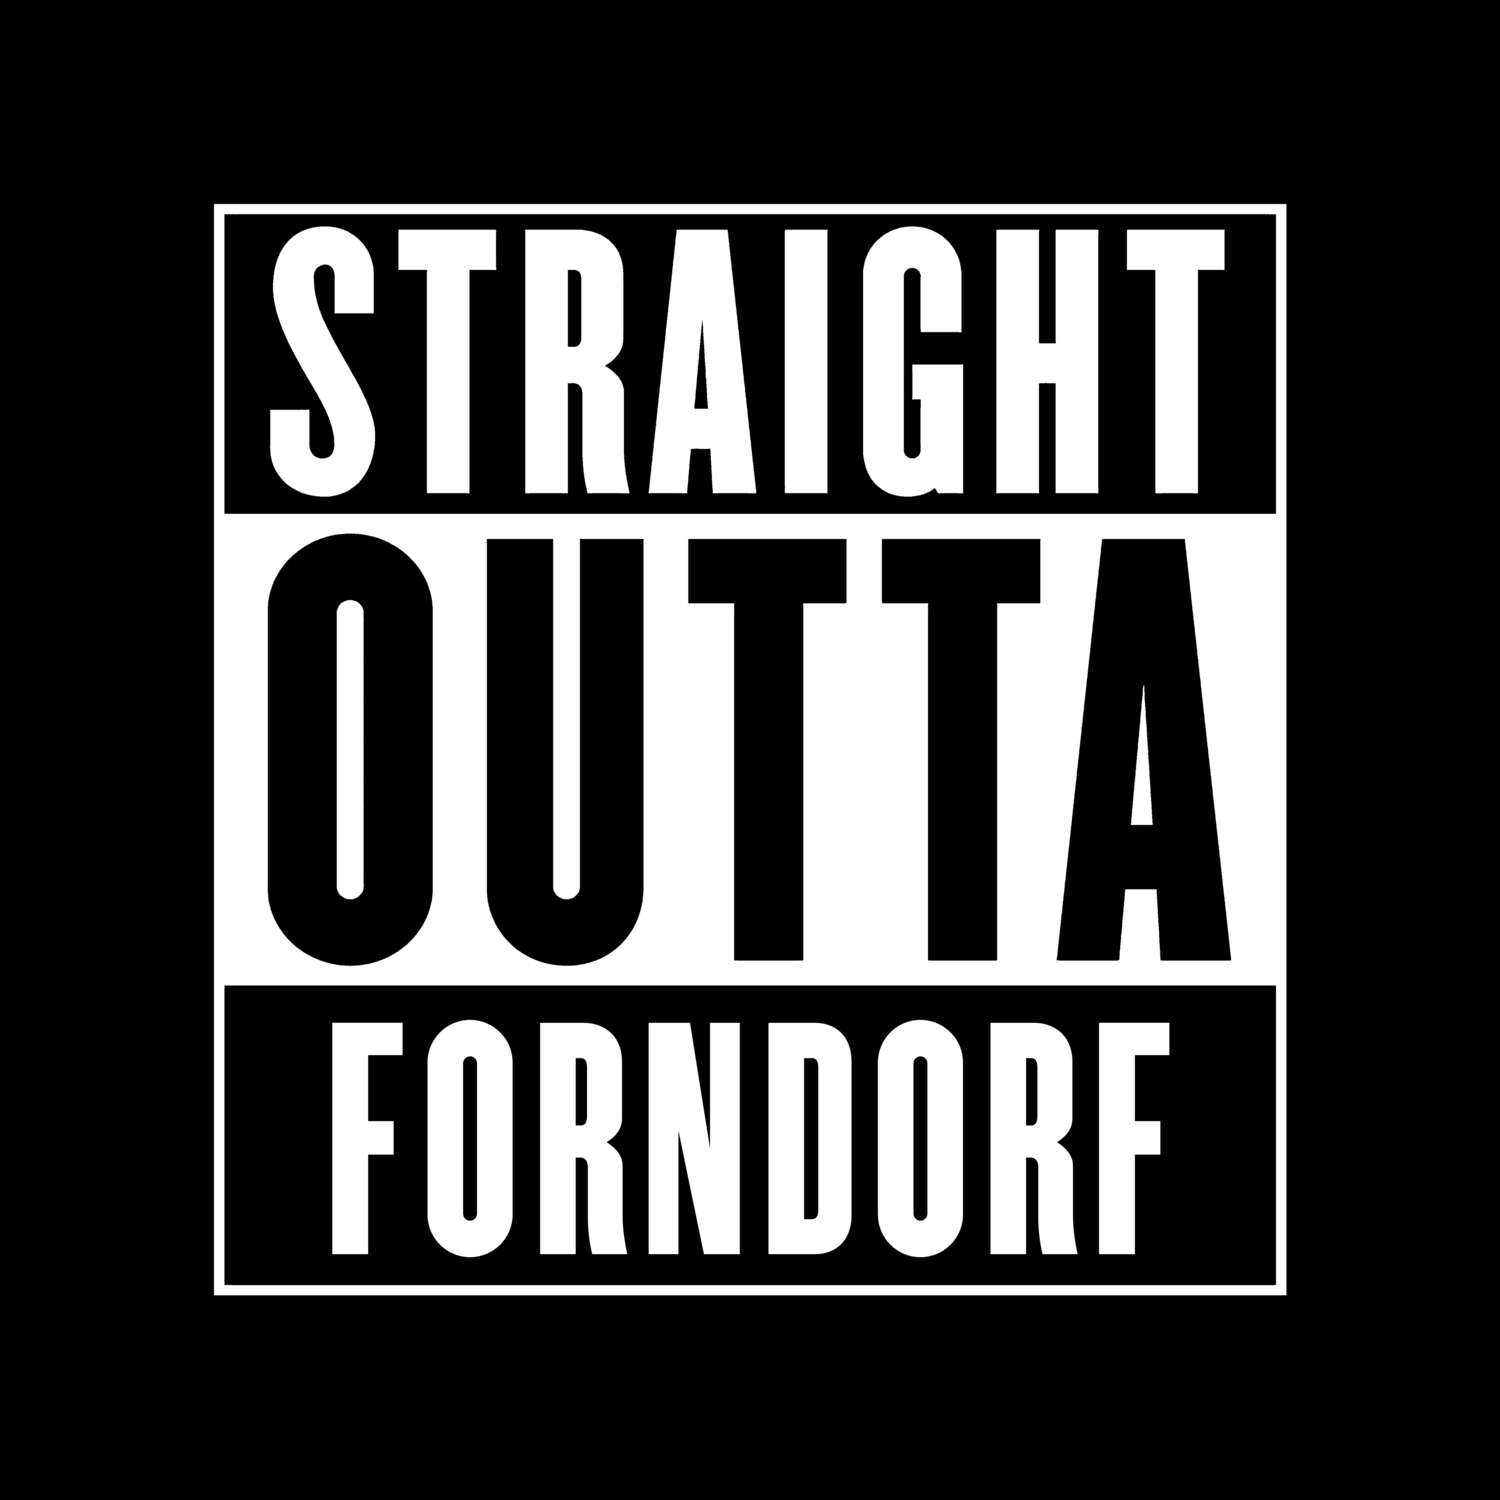 Forndorf T-Shirt »Straight Outta«